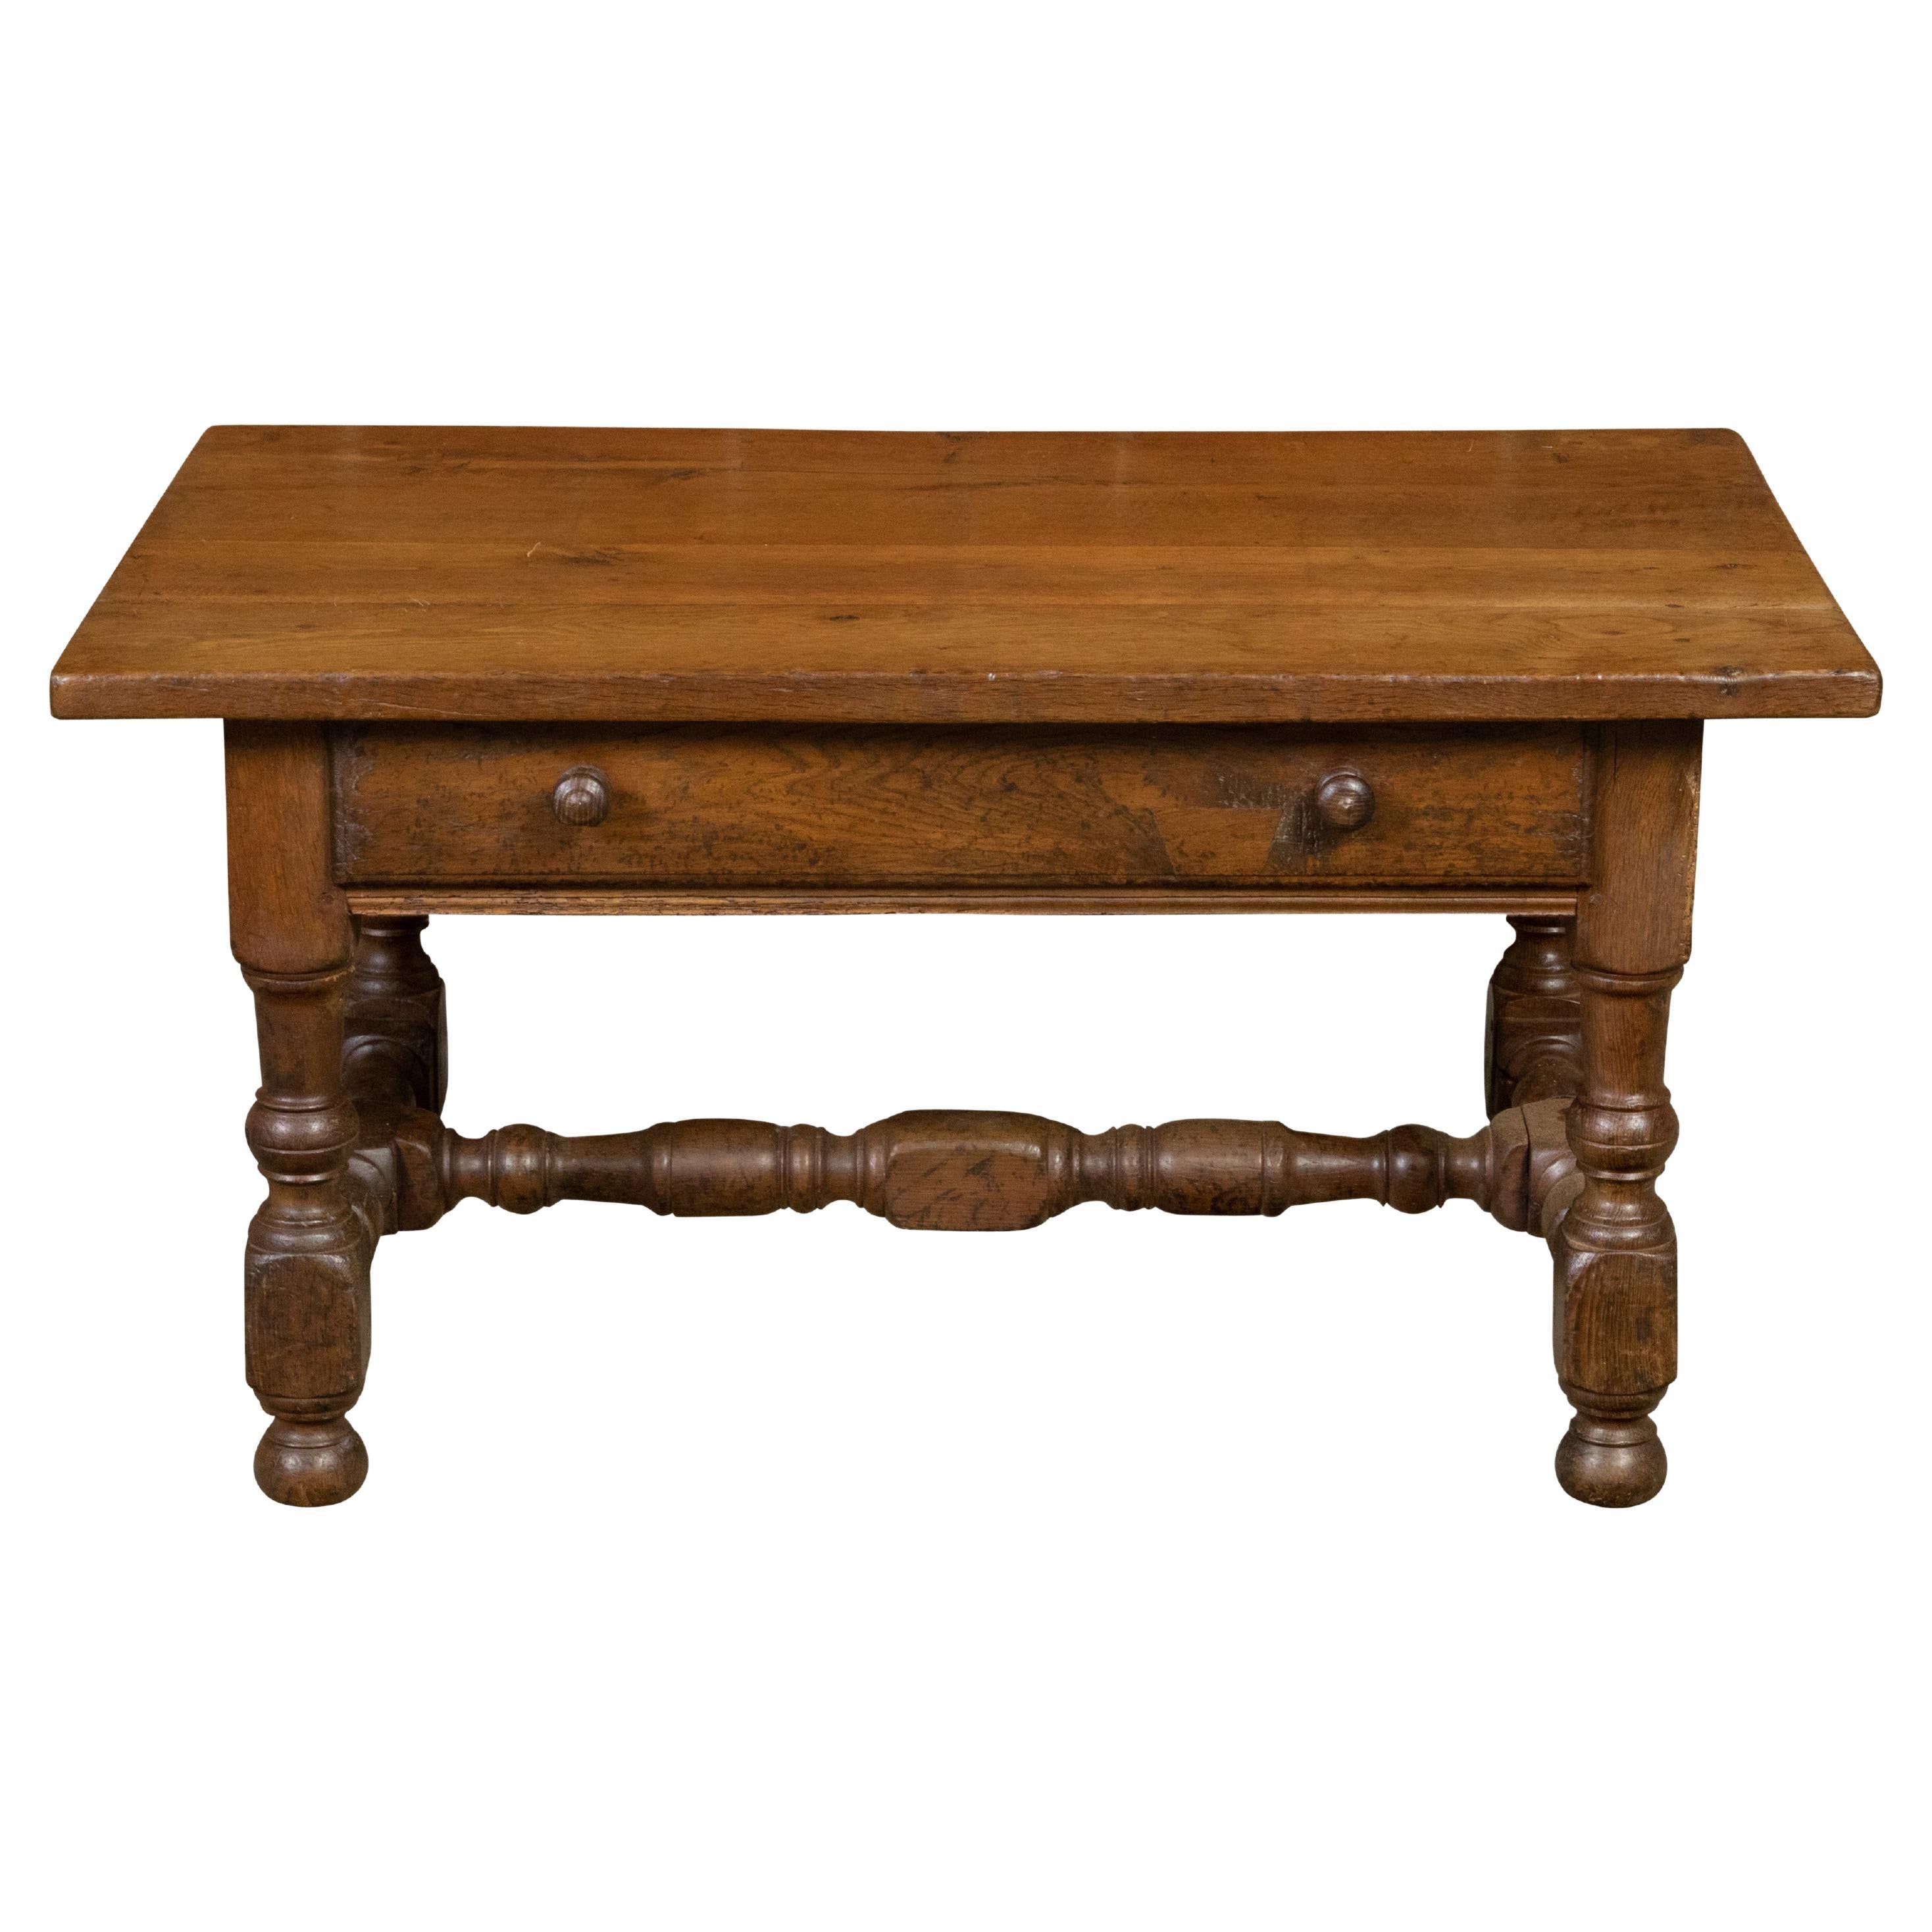 English 19th Century Oak Coffee Table with Single Drawer and Turned Base